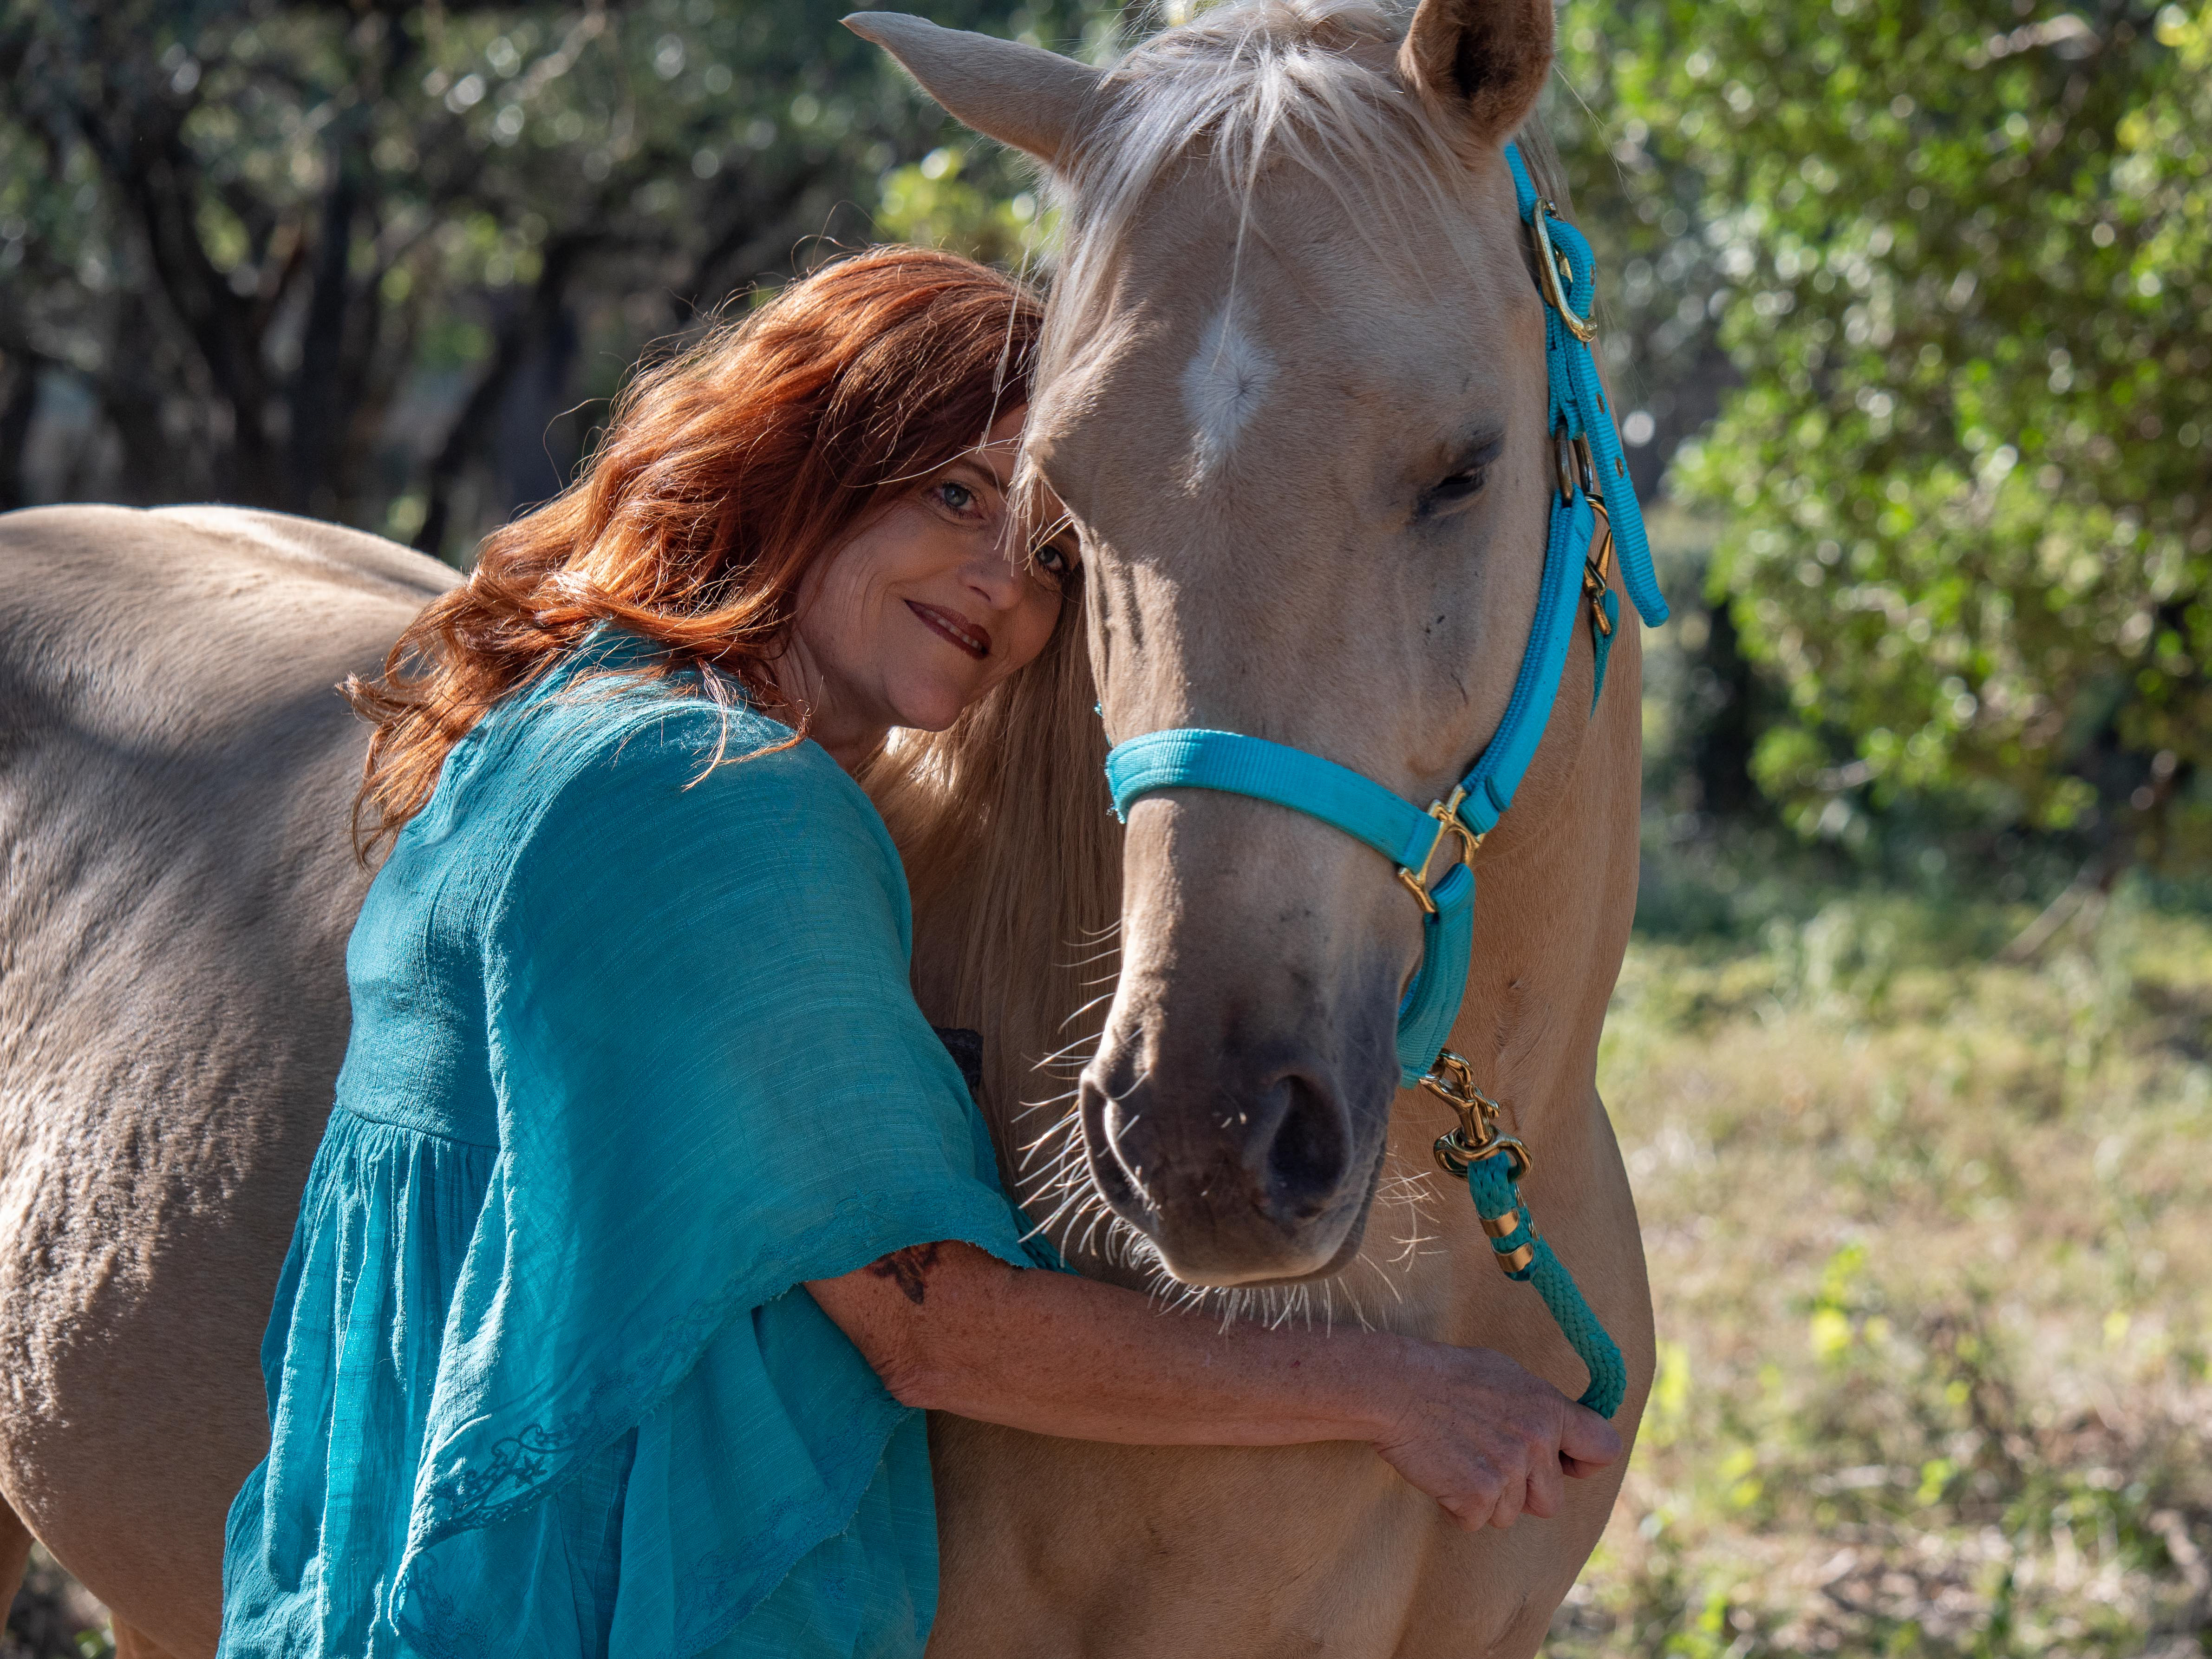 Julie Bradshaw leaning on palomino horse with turquoise halter named Ankh